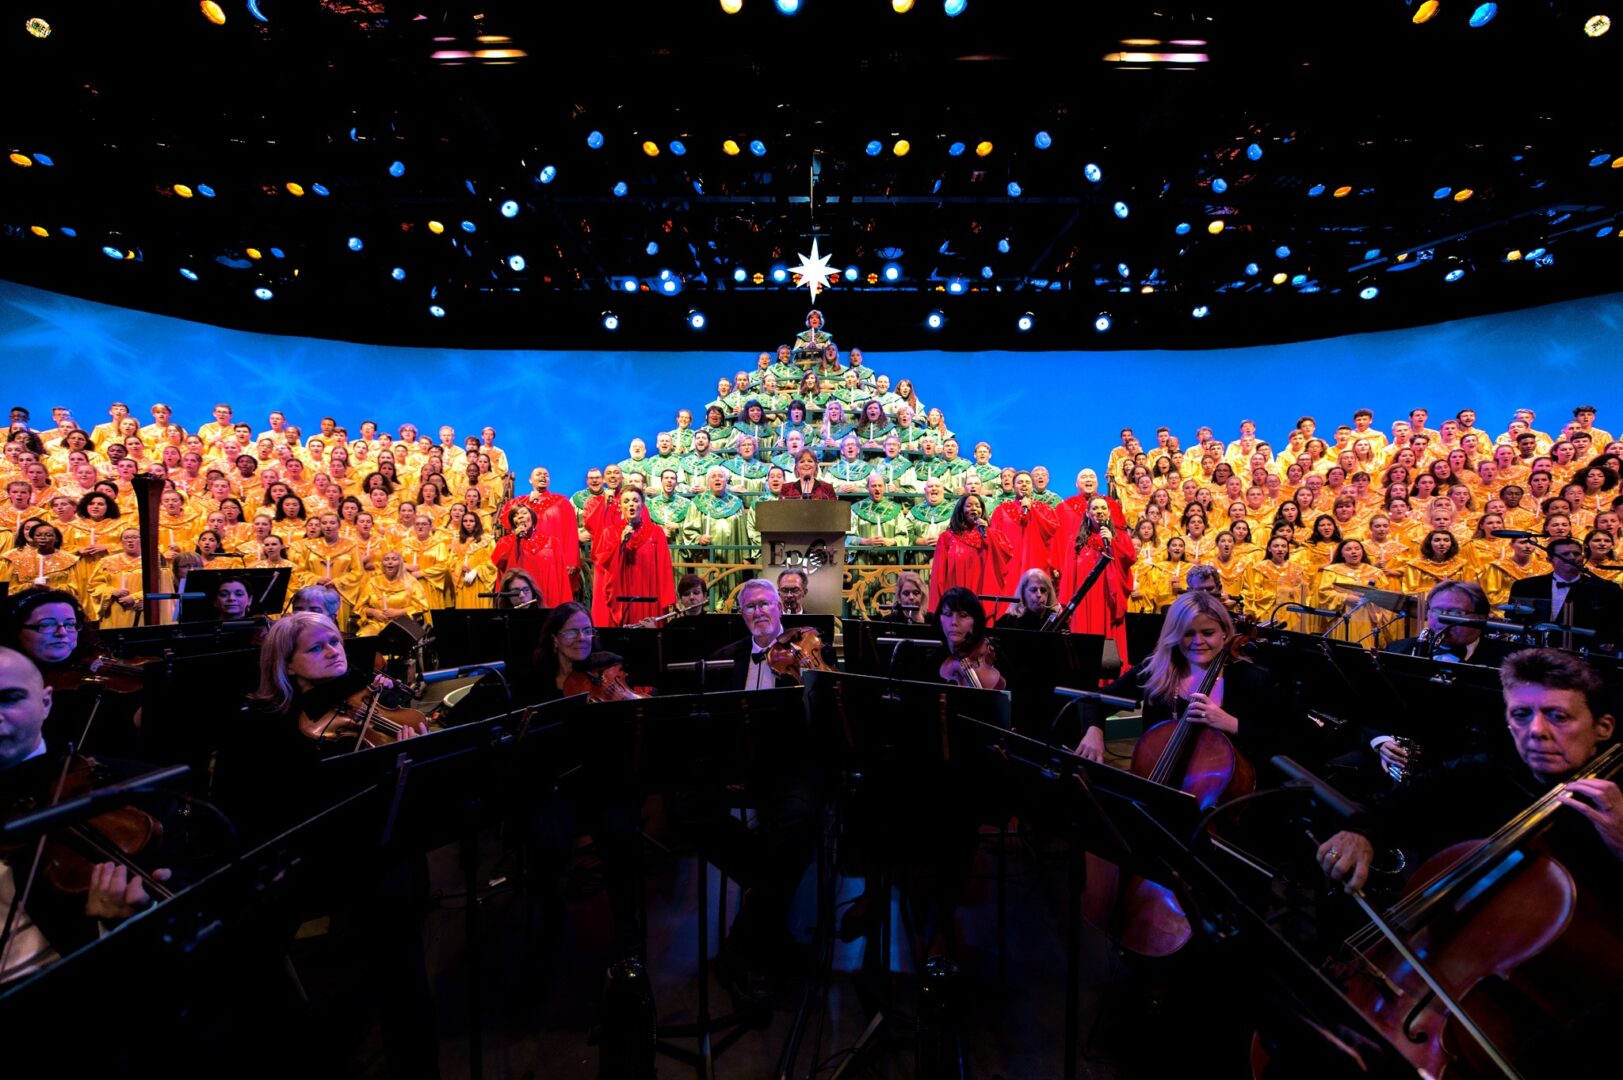 Disney World is Seeking Musicians for The Candlelight Processional Orchestra